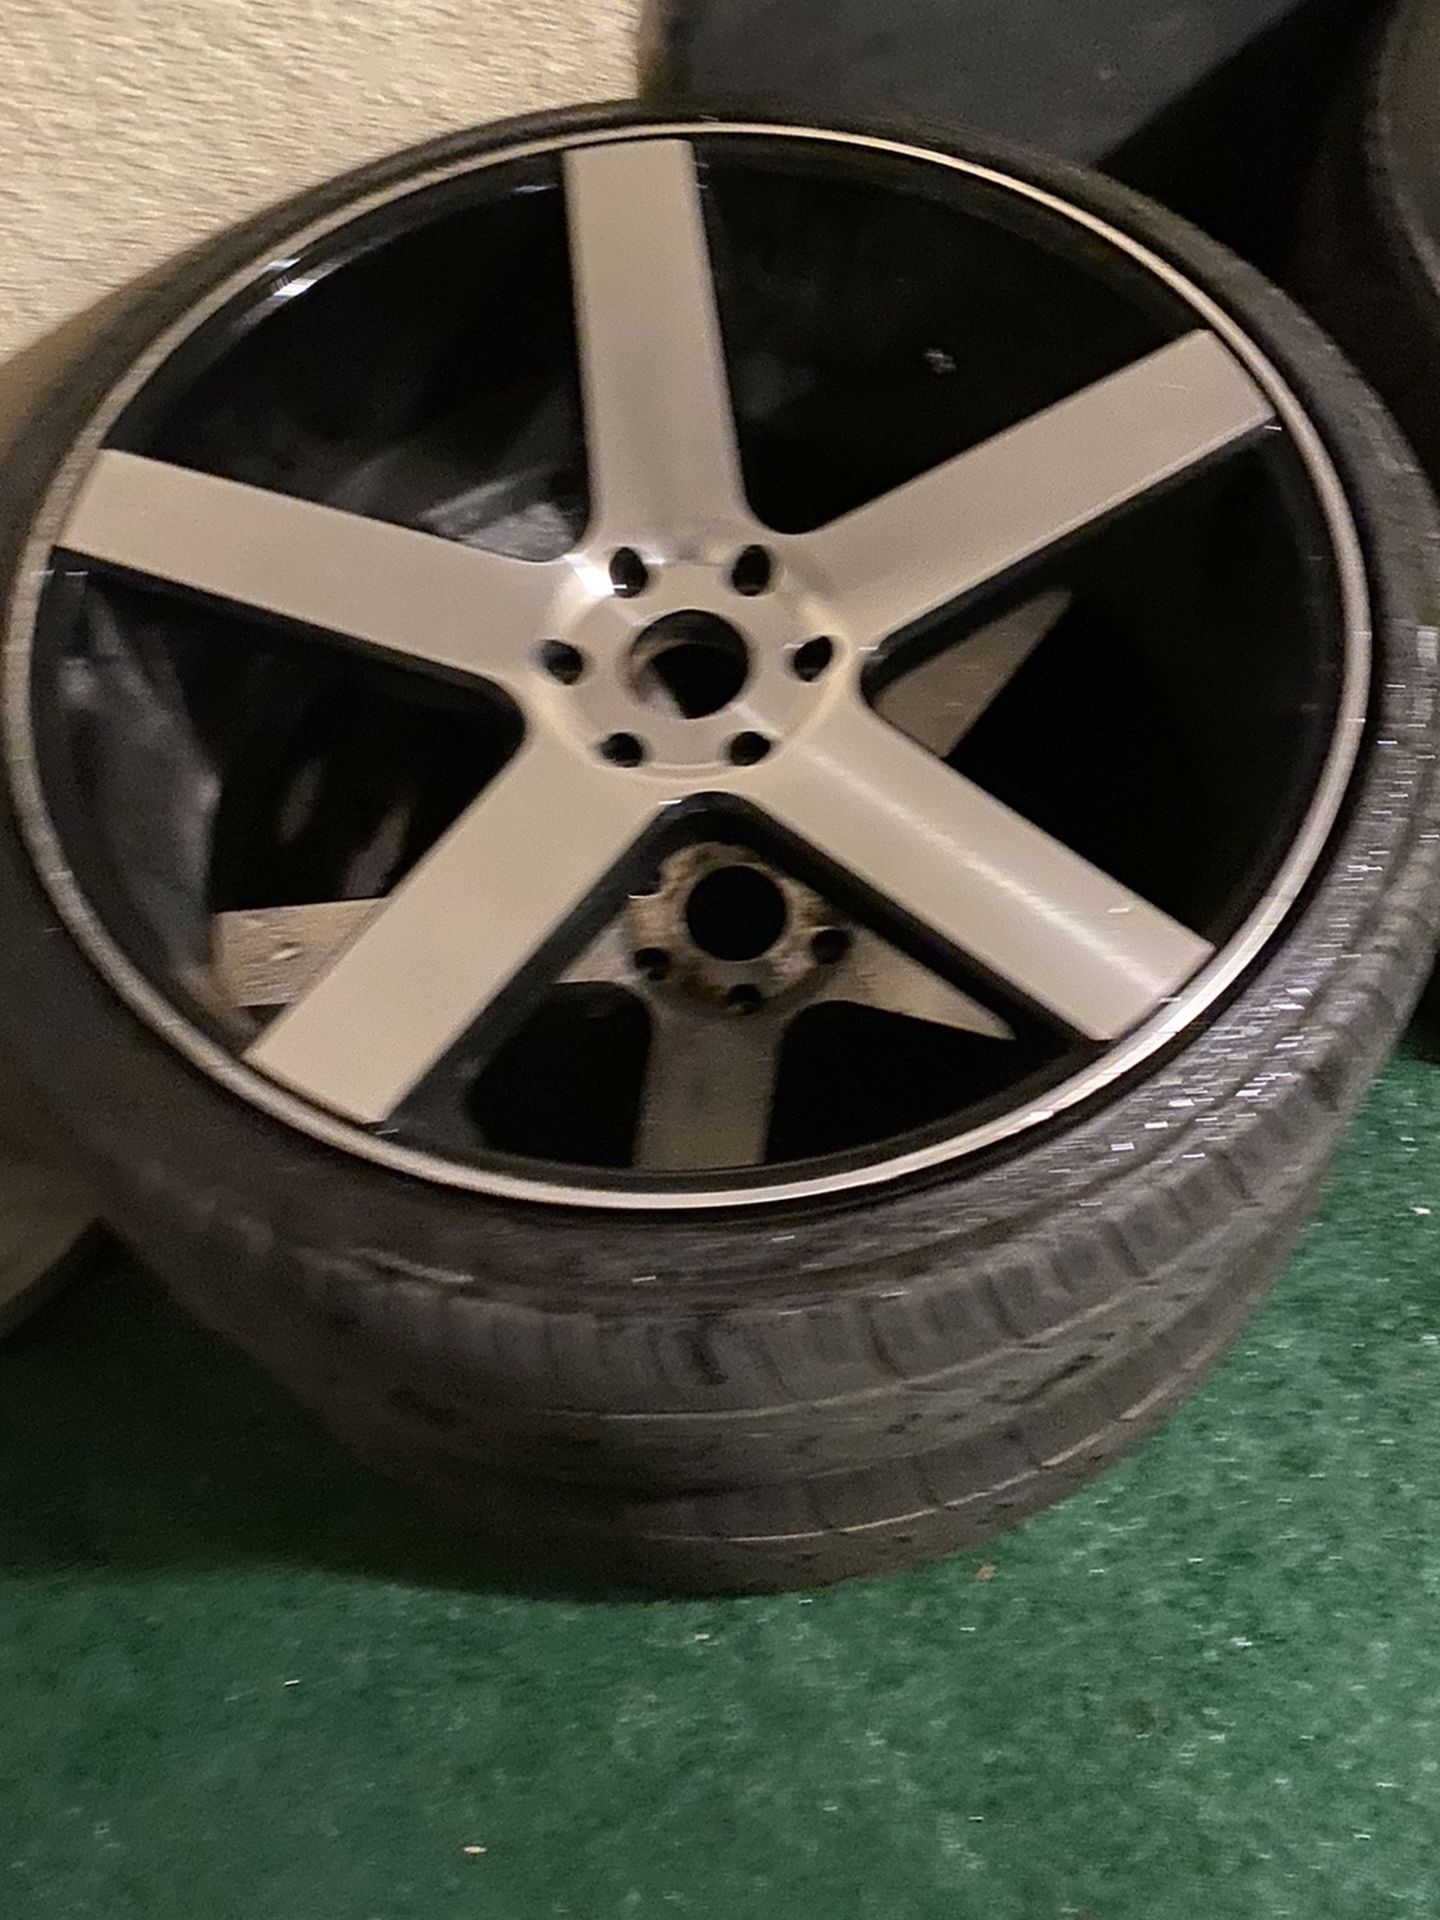 6Lug 26” Rims And Good Tires Holds Air